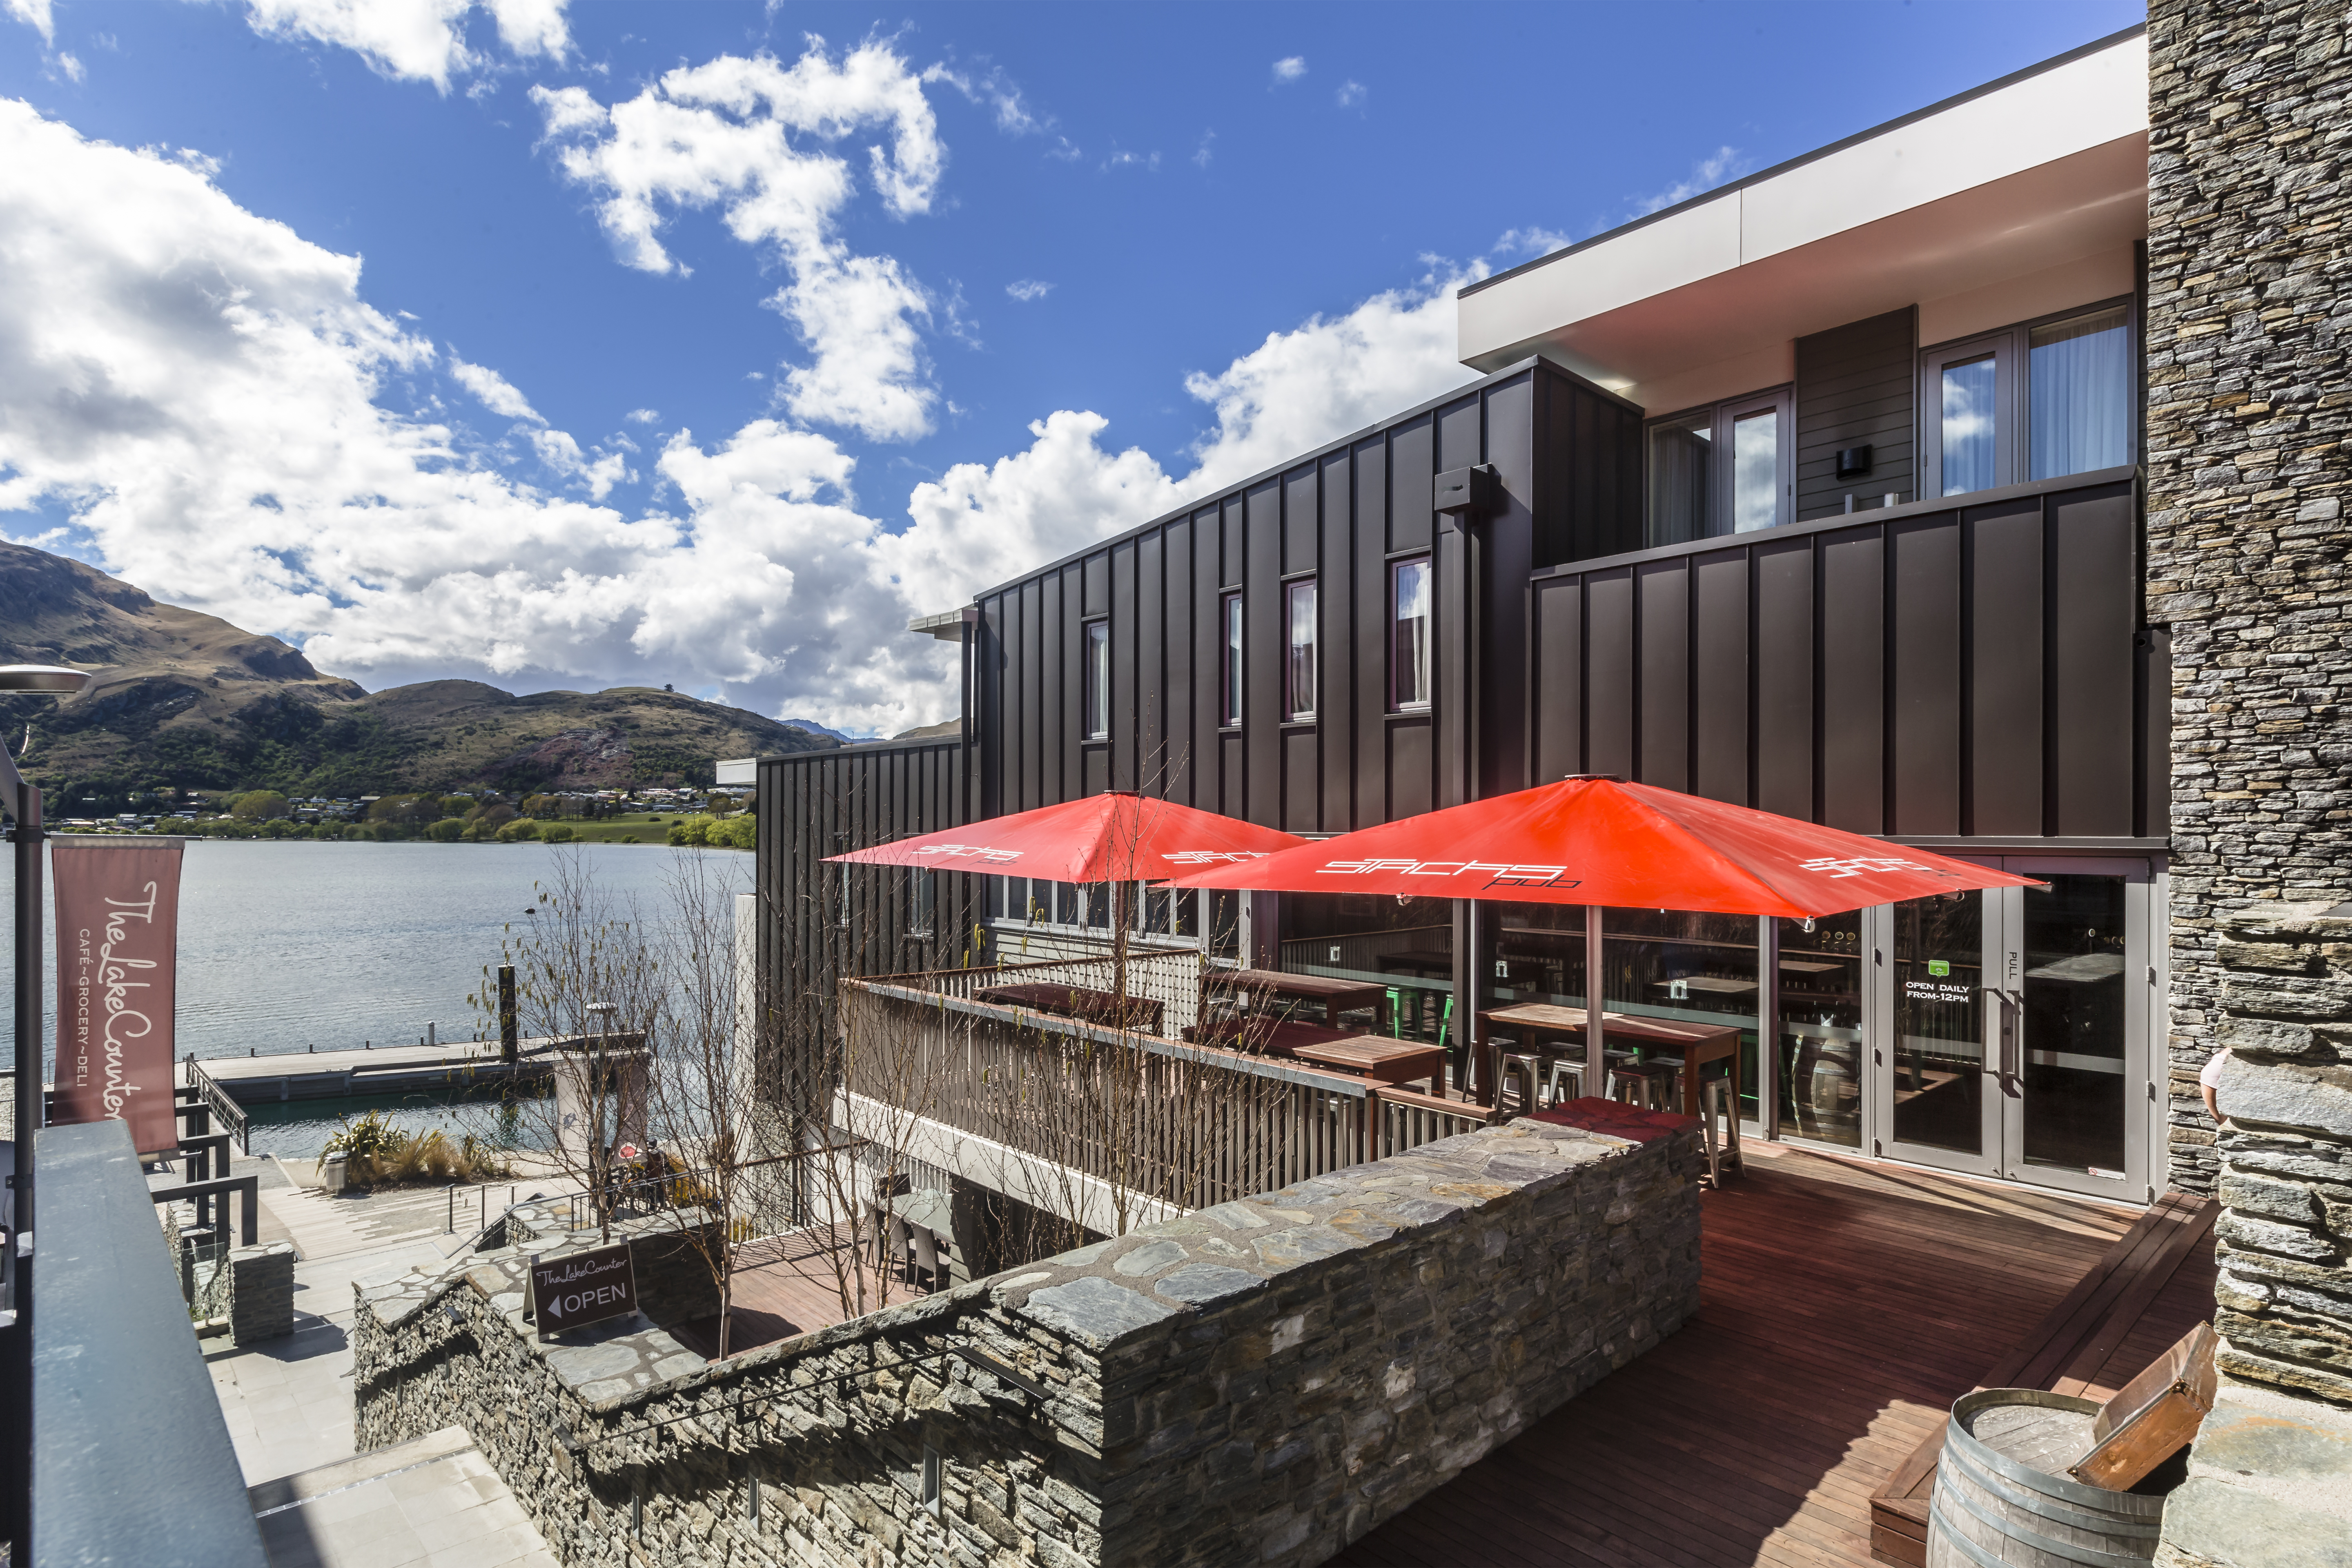 Hotel Exterior and Pub Deck with Sea and Mountain Views